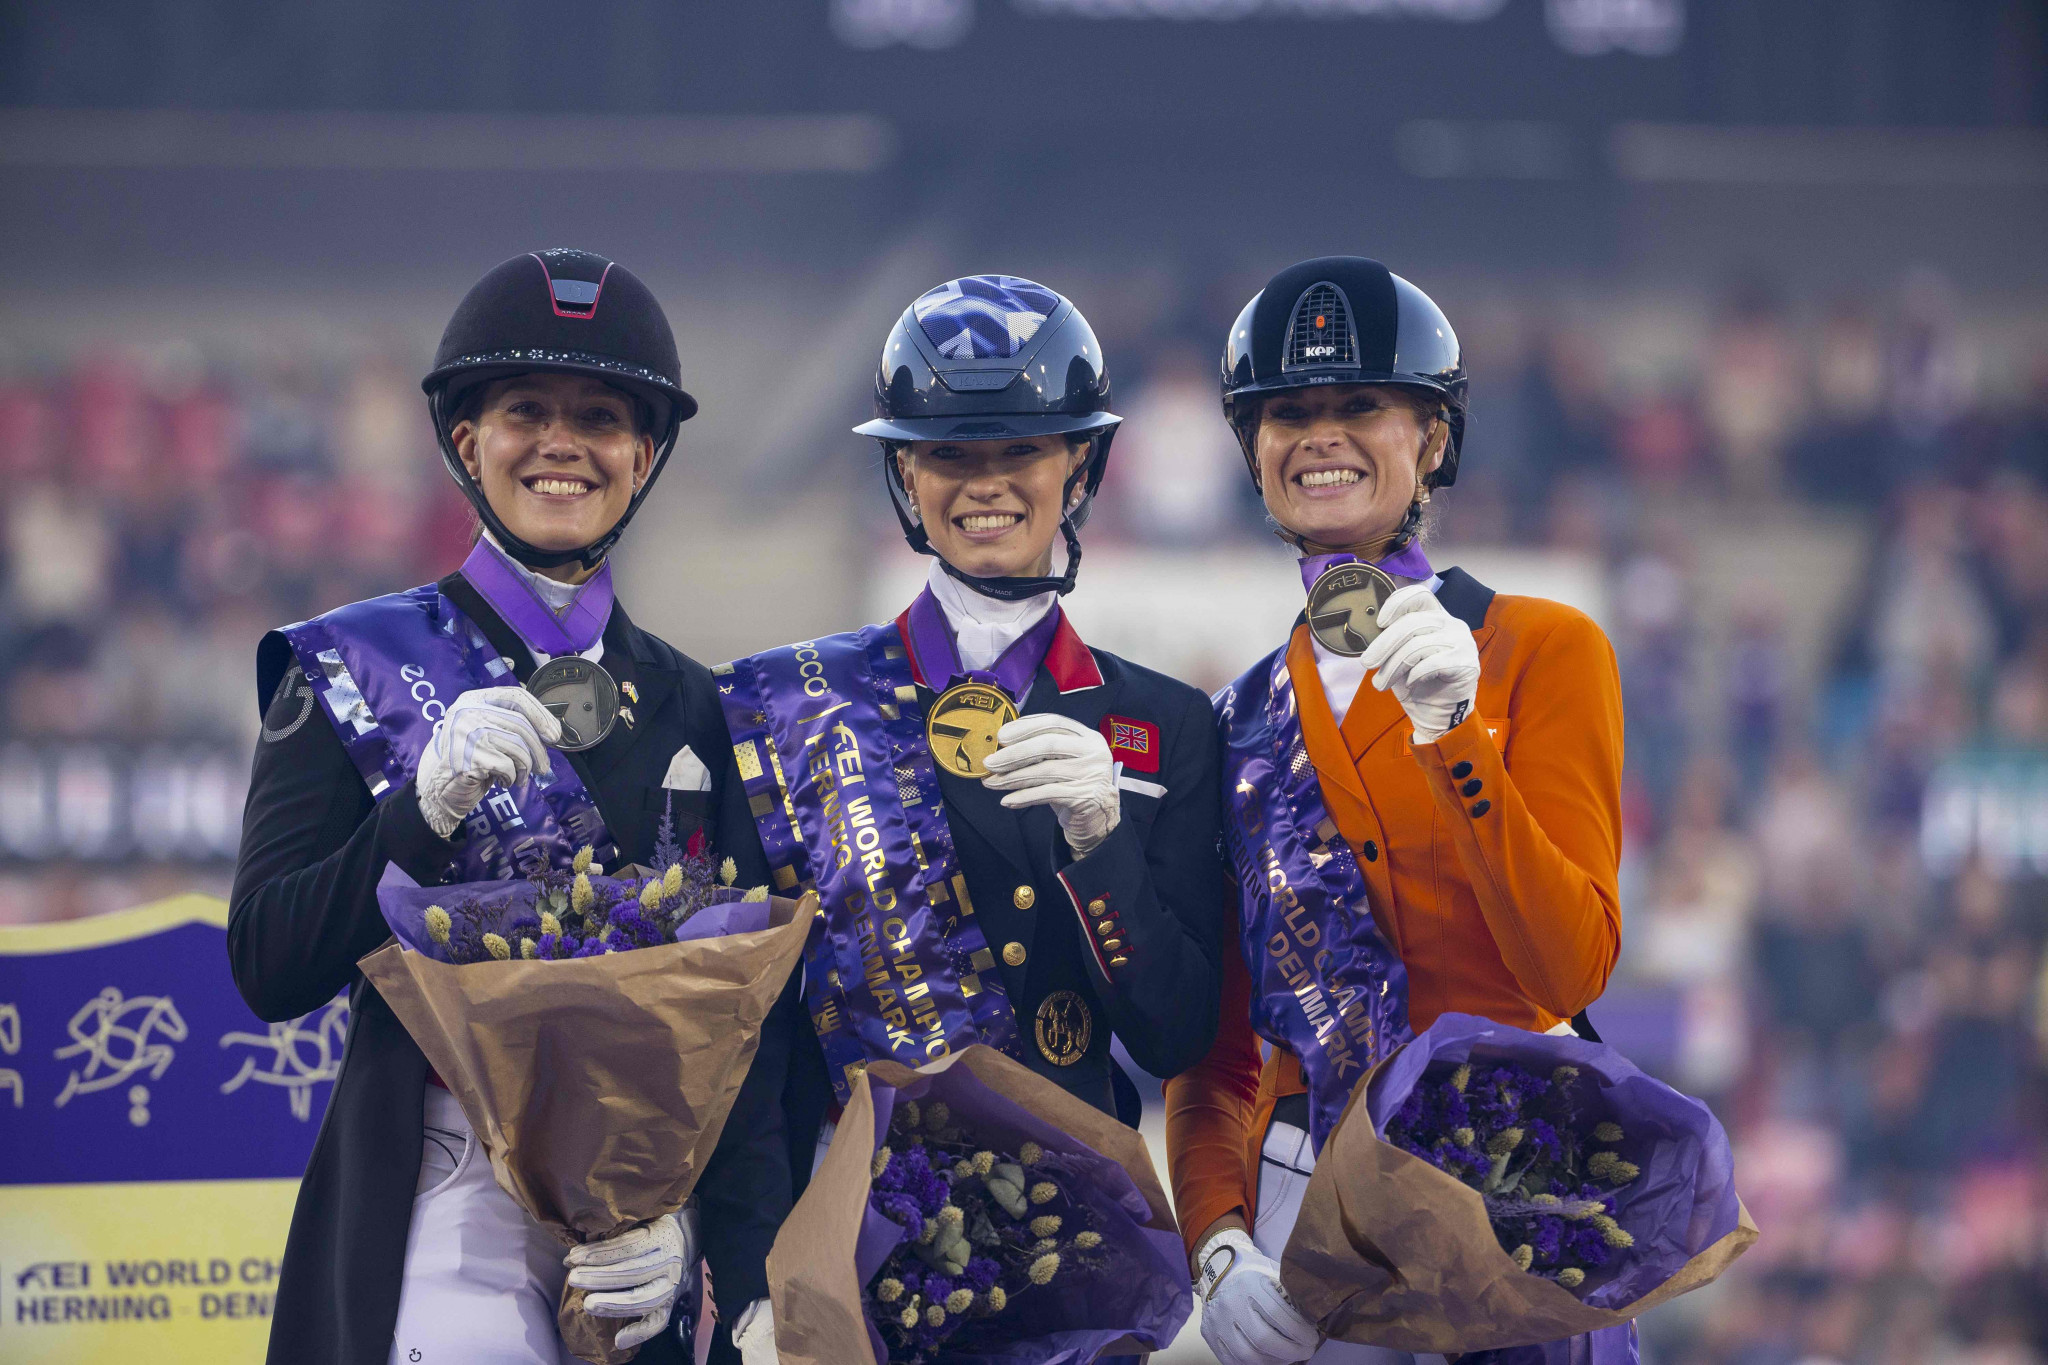 Fry takes gold in Grand Prix Special at World Equestrian Championships in Herning